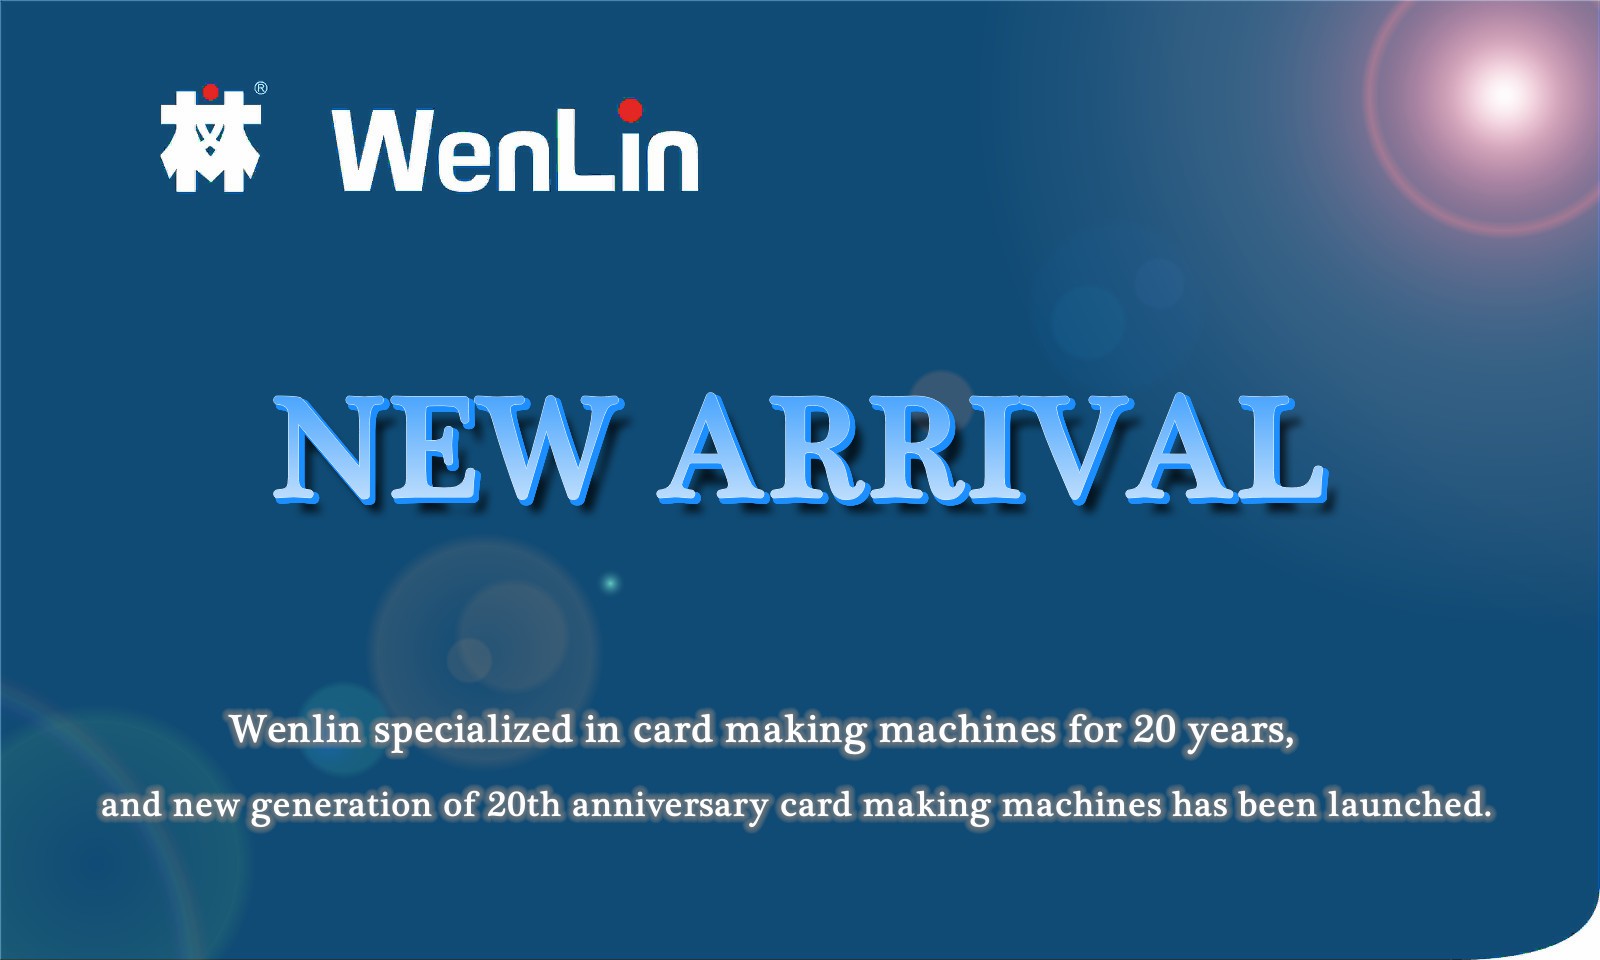 Wenlin specialized in card making machines for 20 years, and new generation of 20th anniversary card making machines has been launched.